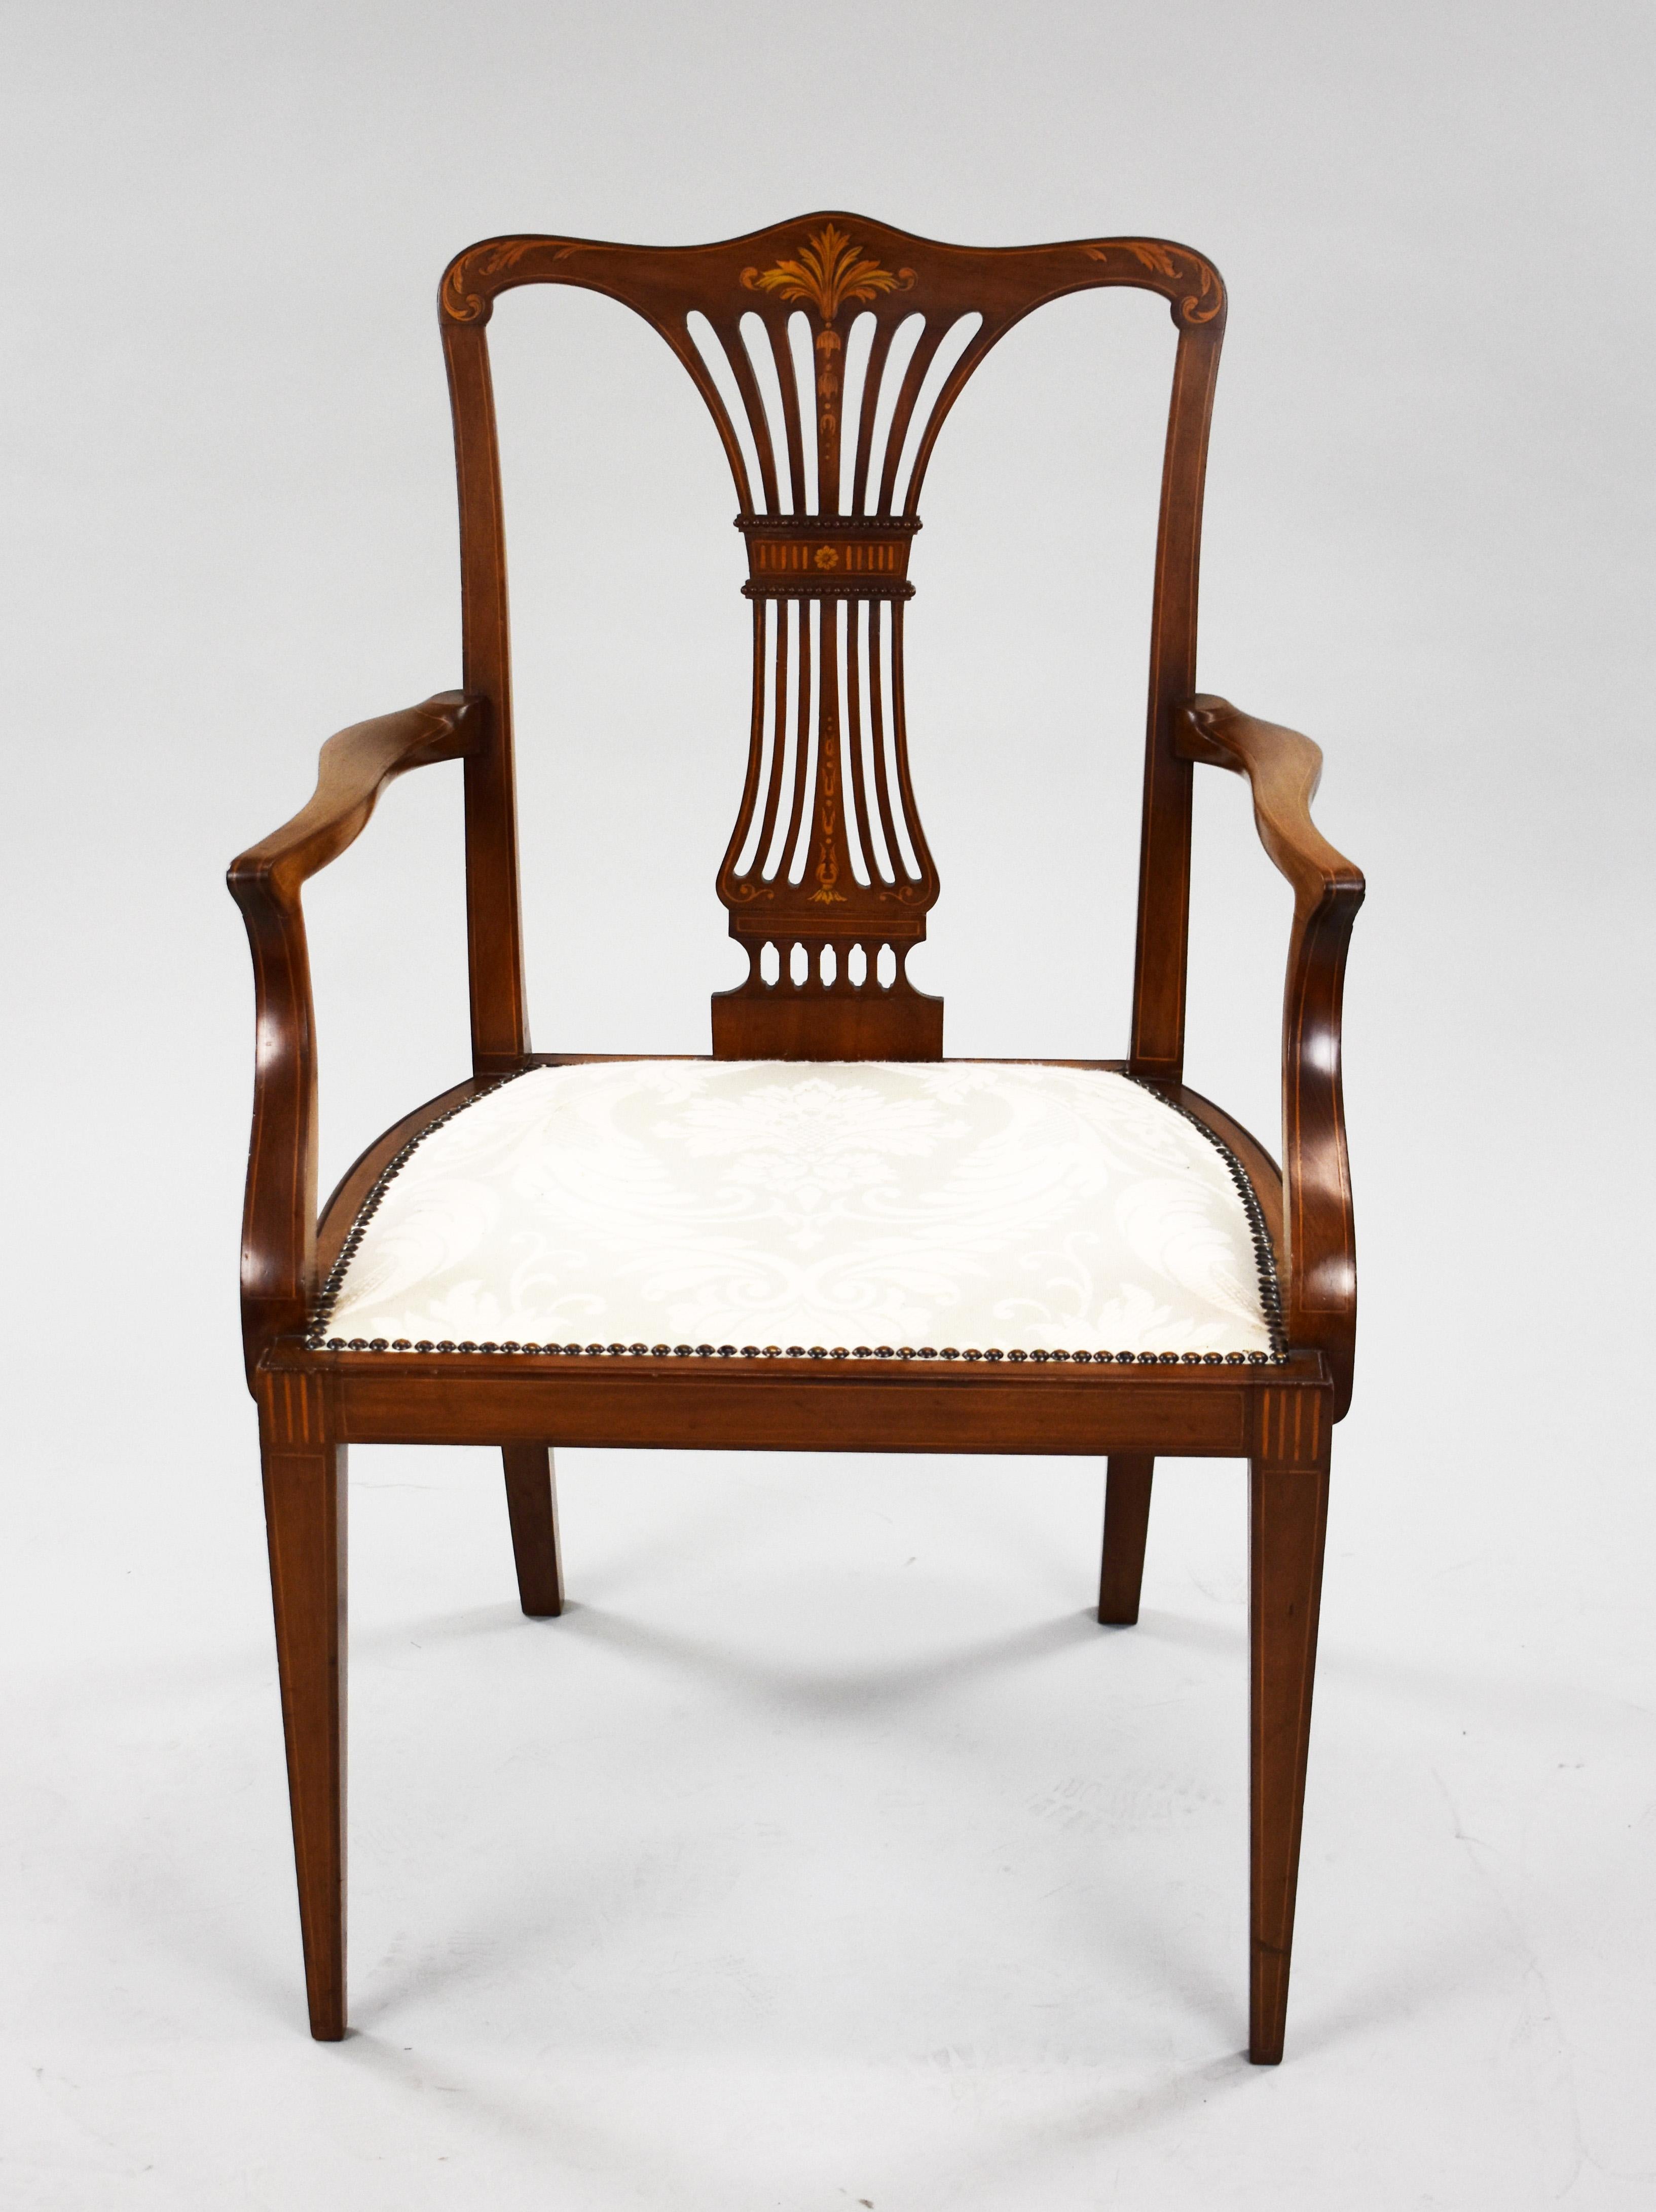 For sale is a good quality Edwardian mahogany inlaid open armchair, remaining in very good condition for its age. 

Measures: Width: 58cm Depth: 55cm Height: 91cm.